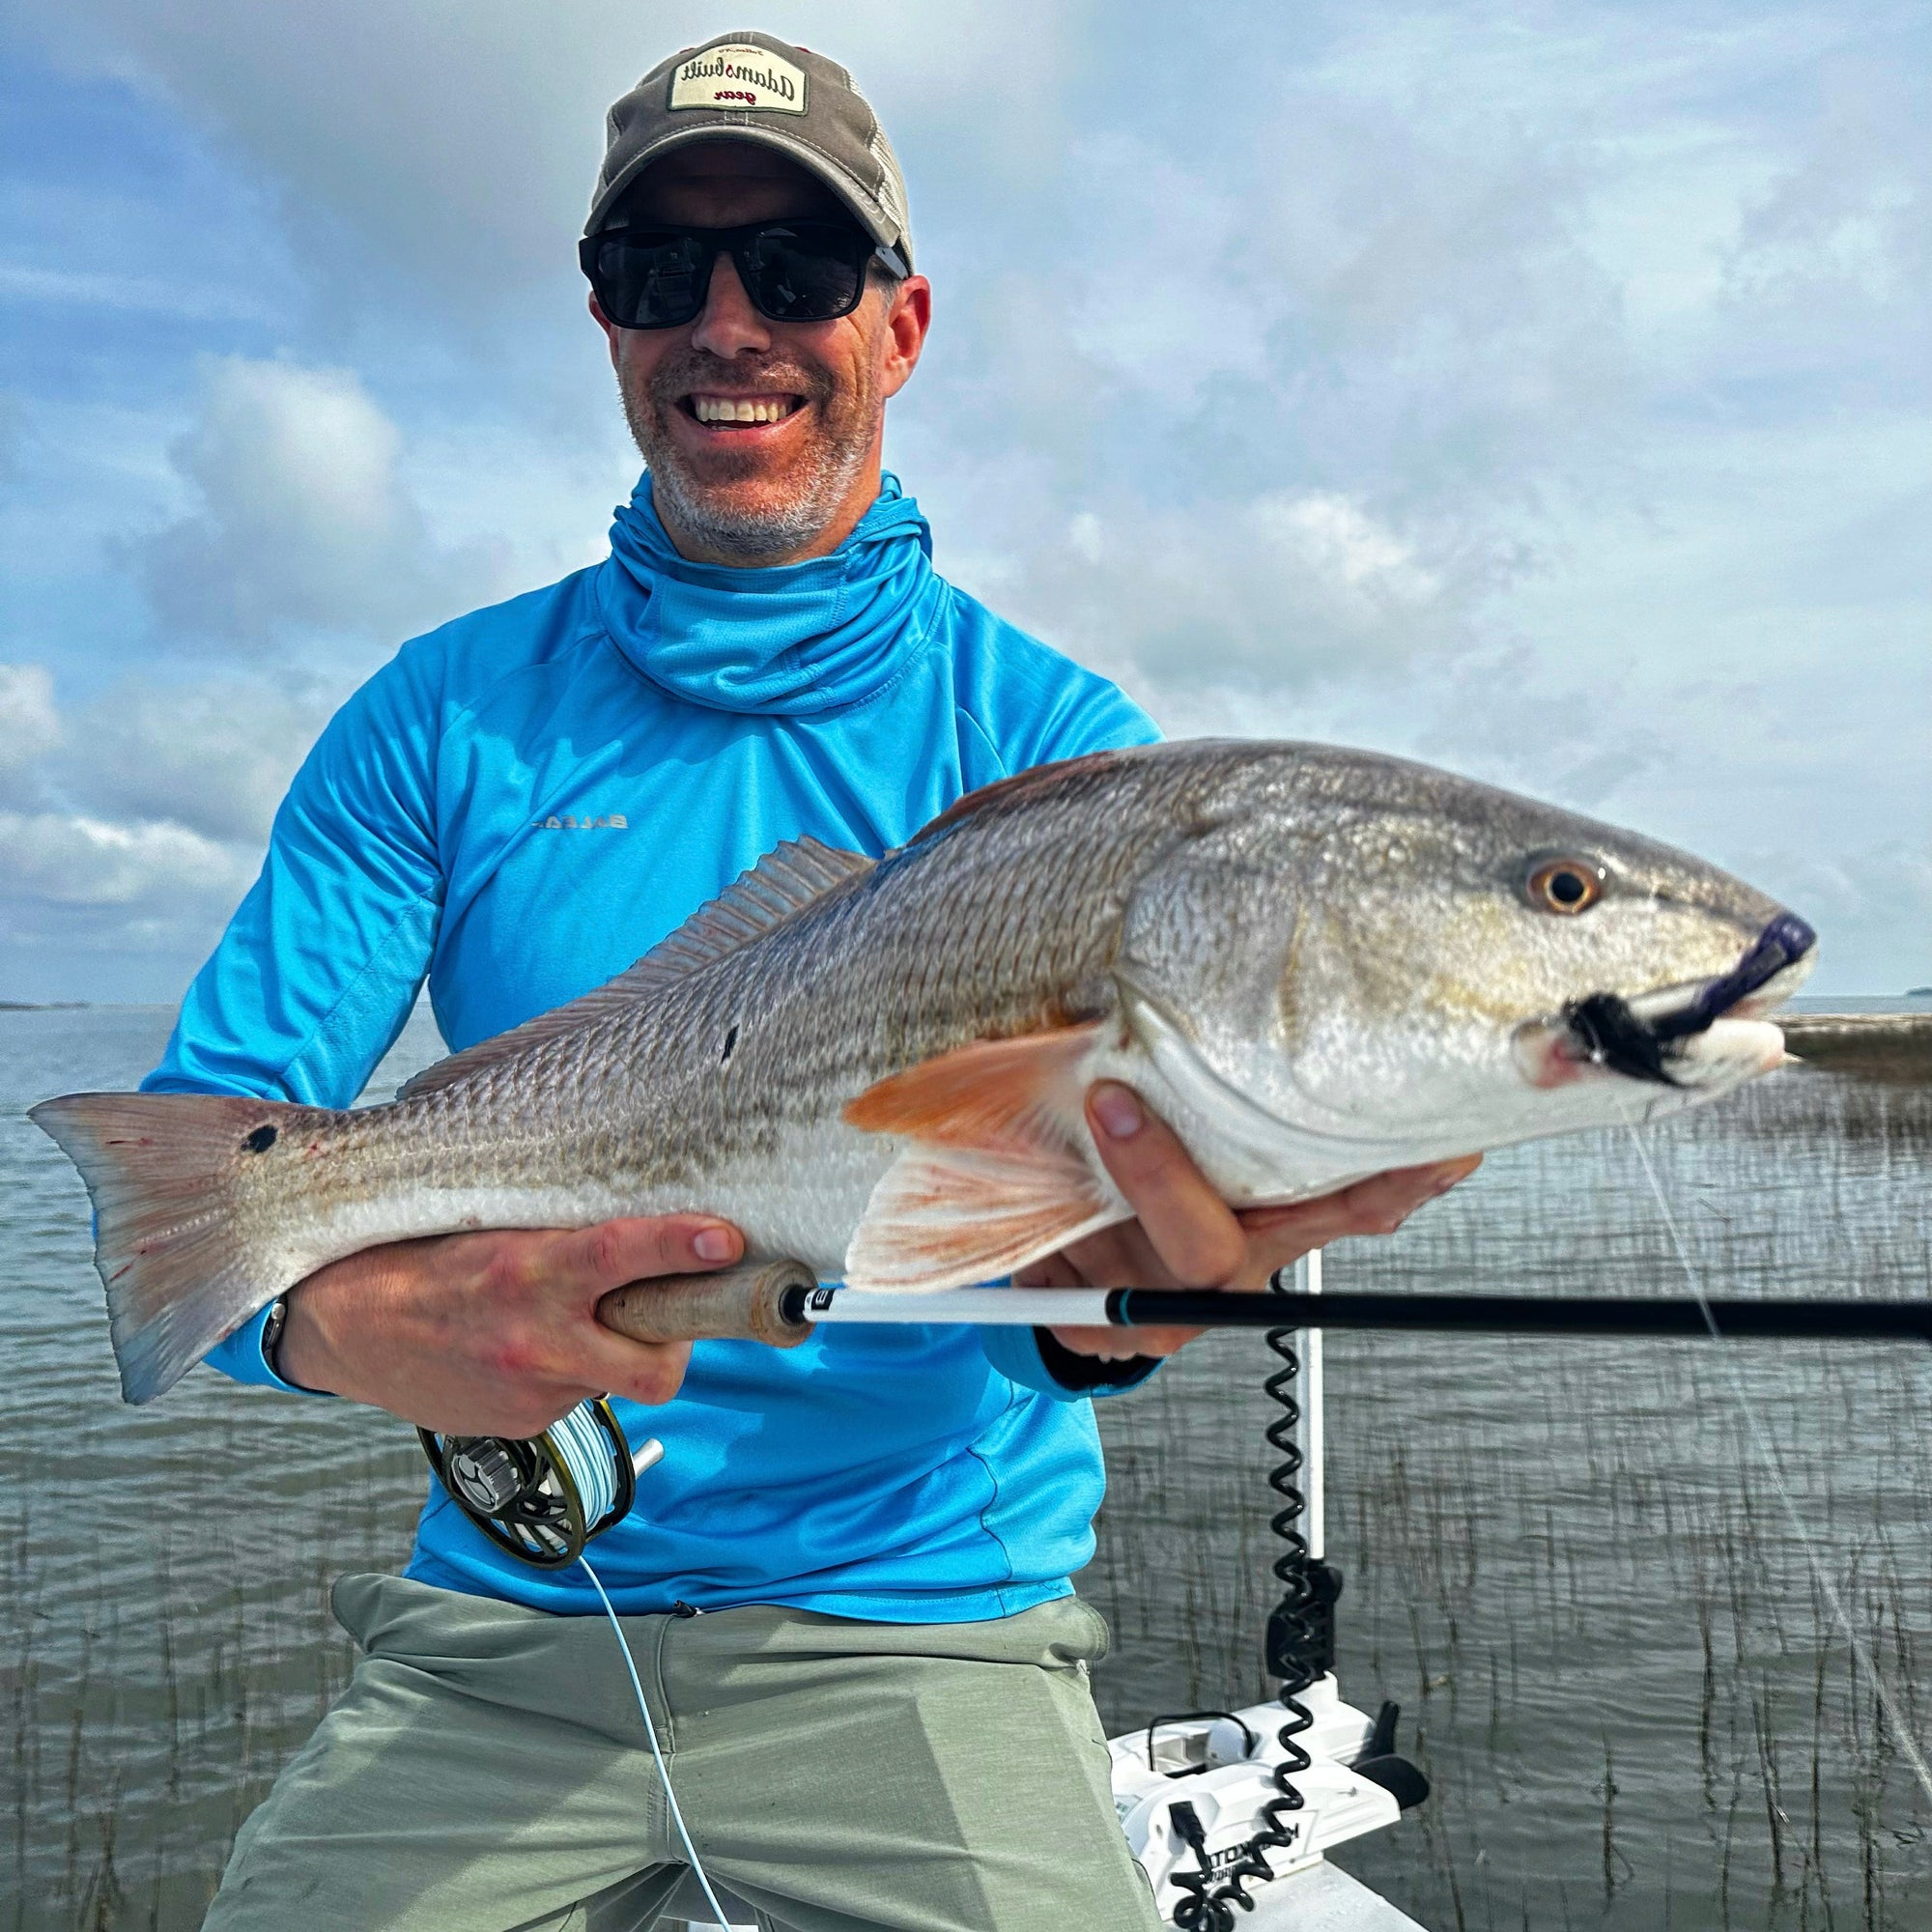 Nothing better than putting a client on their first redfish on fly!